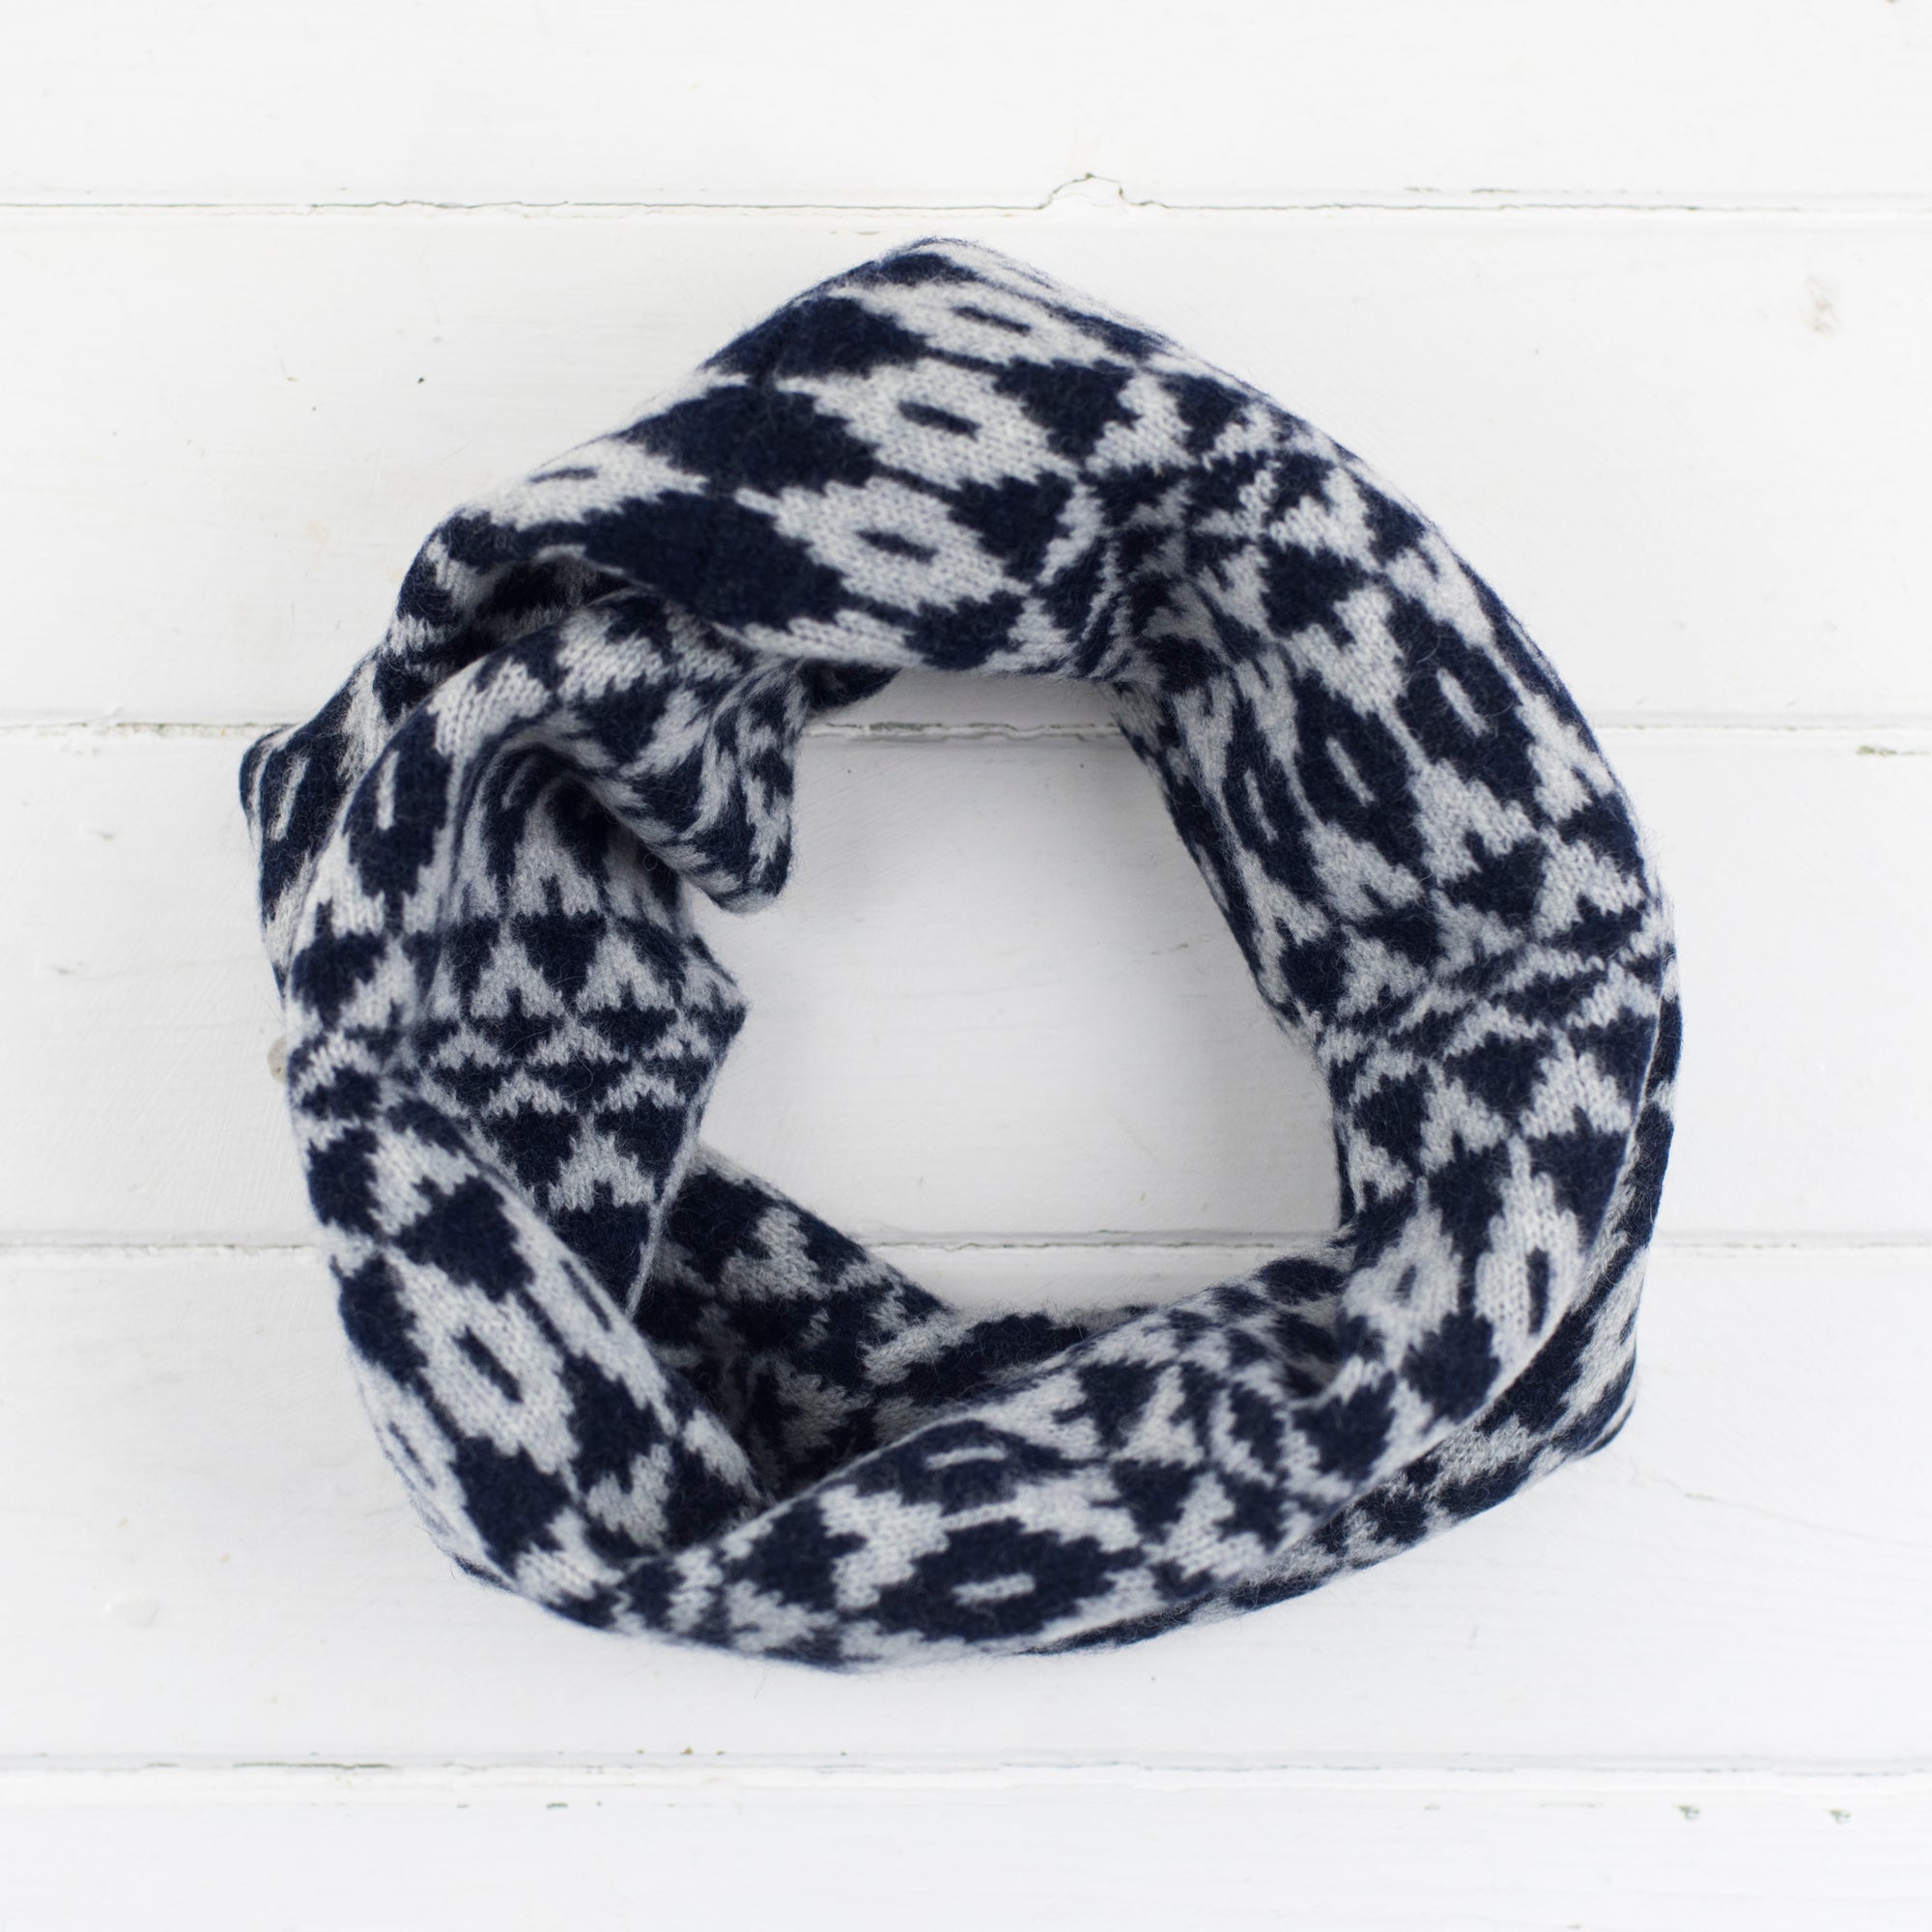 Mirror snood / cowl - navy and grey (MADE TO ORDER)